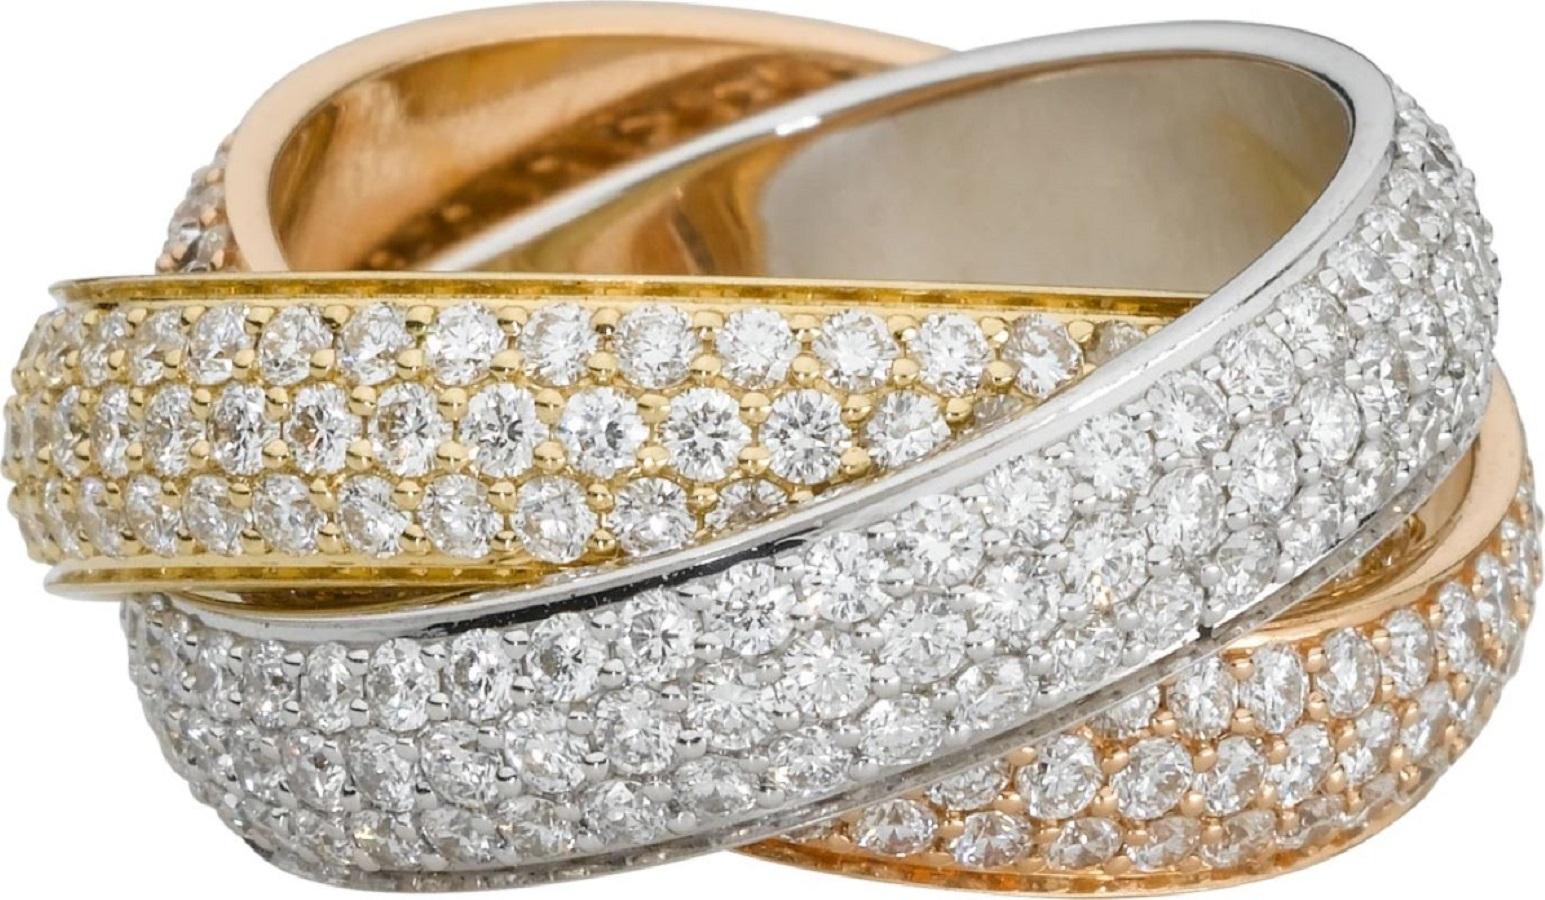 Trinity ring, large model, 18K white gold, 18K pink gold, 18K yellow gold, set with 387 brilliant-cut diamonds totaling 4.64 carats.

Please be advised that EU 53 equals in 6 1/4 to 6.5 American finger size according to Cartier website. 
REF.: